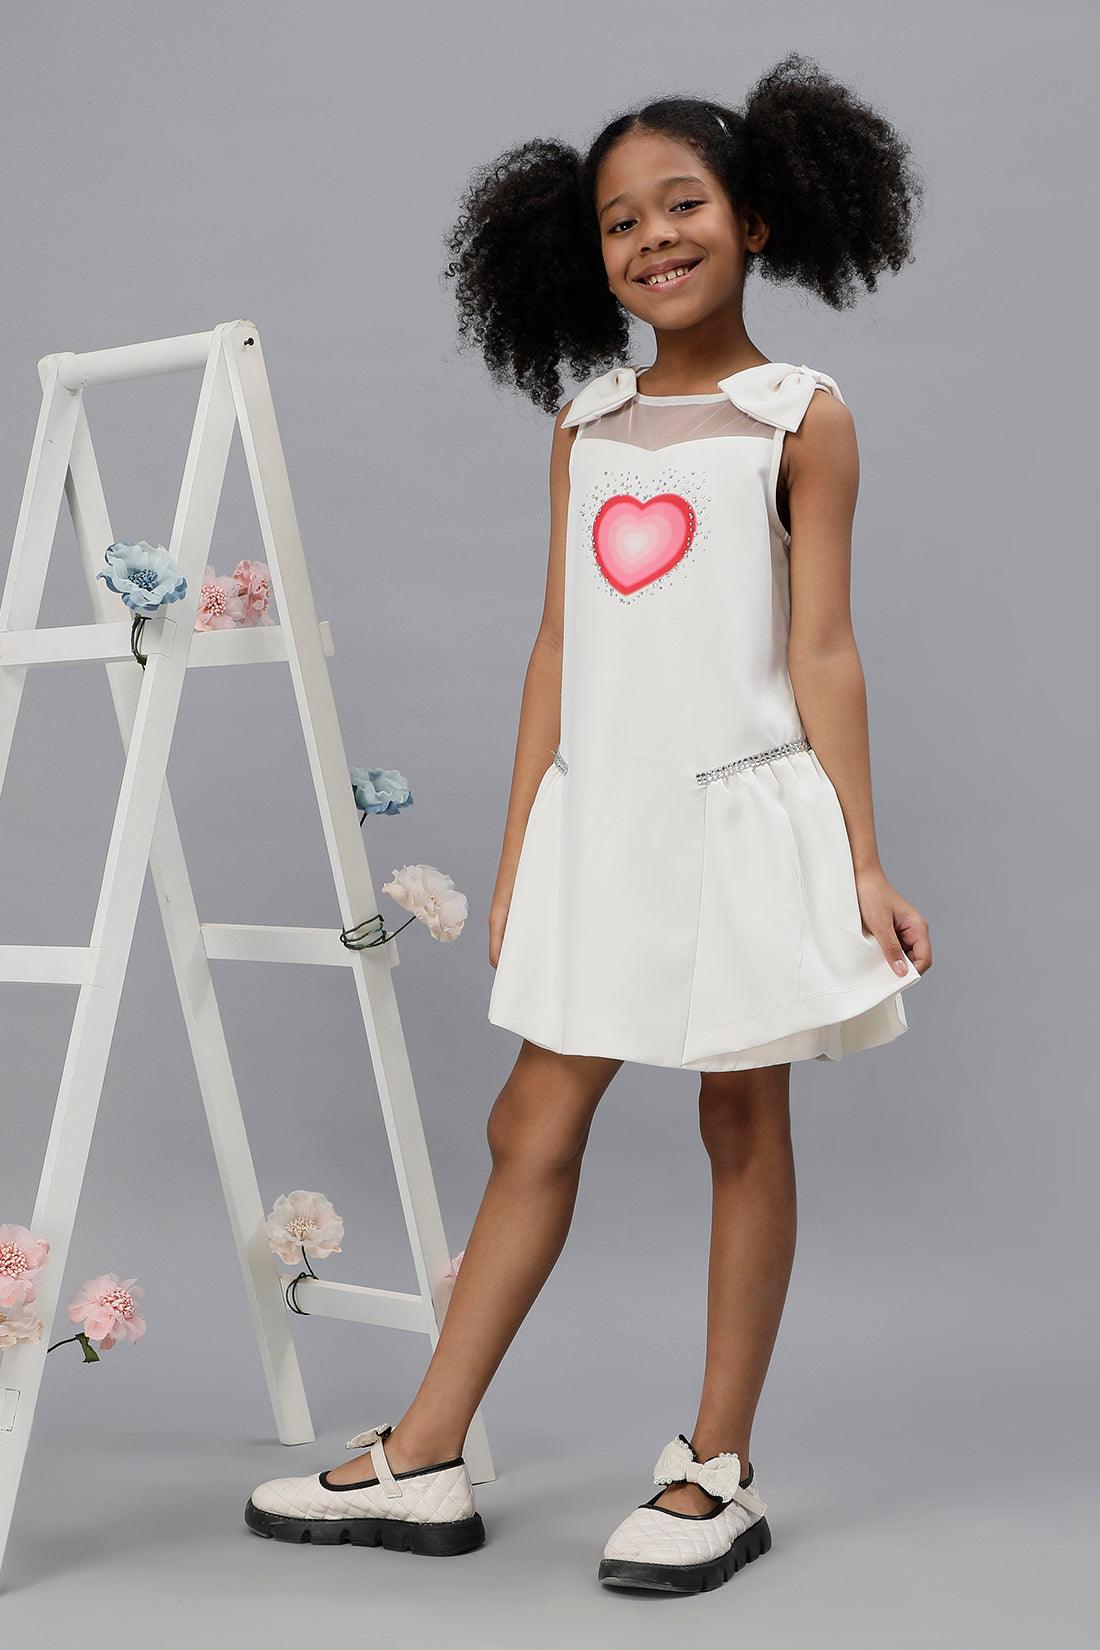 One Friday Girls Bow & Heart White Dress with Embellishment